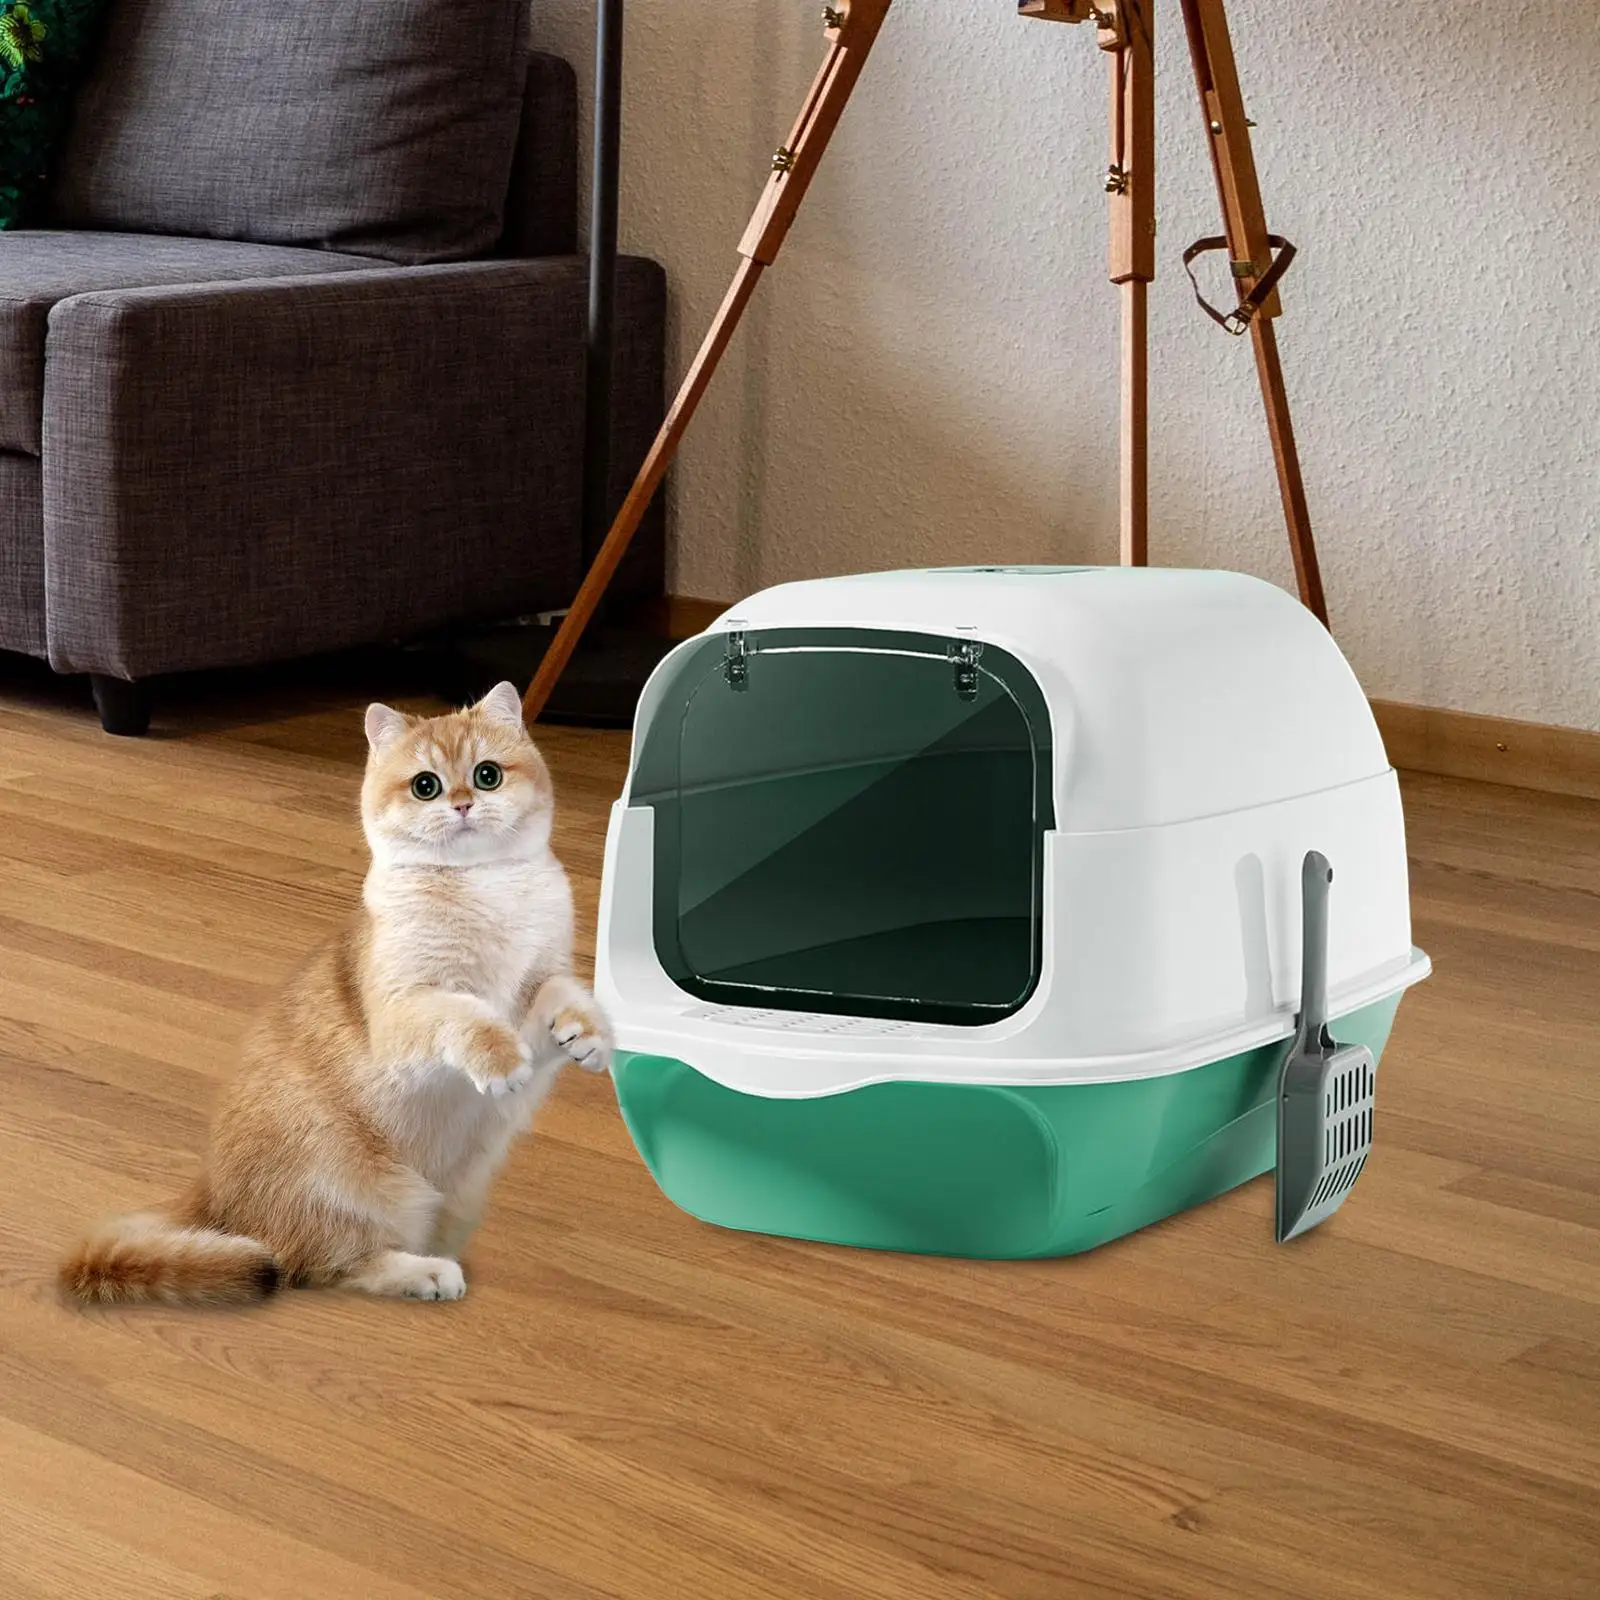 Hooded Cat Litter Box, Pet Litter Box with Lid Large Anti Splashing with Front